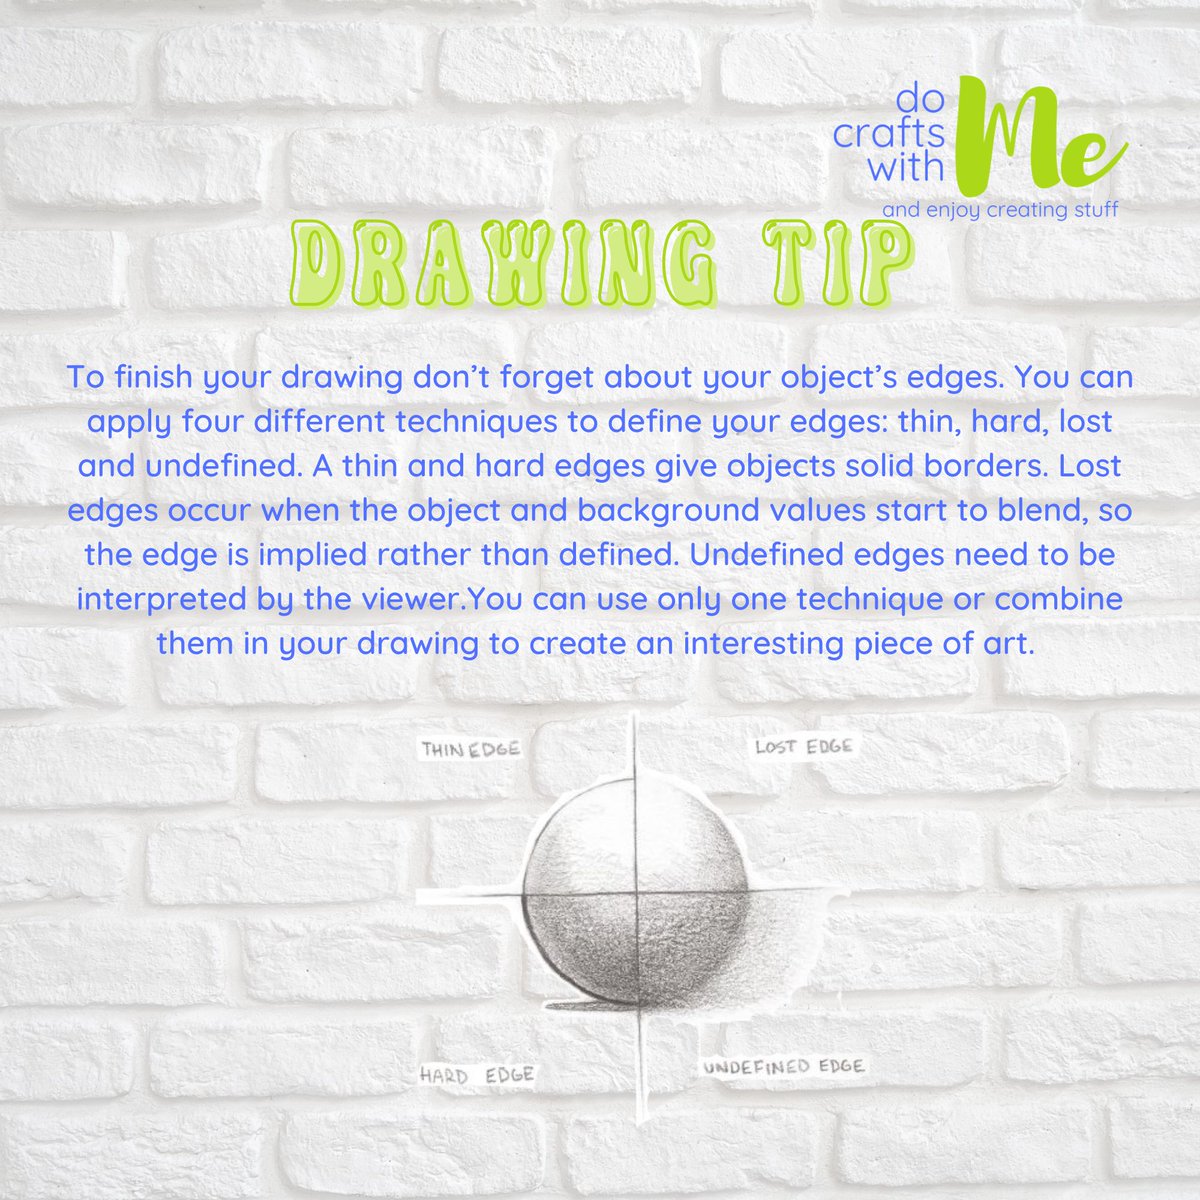 Discover the magic of drawing edges! Whether it's the solid borders or the intriguing blend of objects and backgrounds, the importance of edges in your drawings cannot be overlooked. 
#DrawingEdges #ArtisticTechnique #SolidBorders #LostEdges #ArtisticBalance #DrawingTips